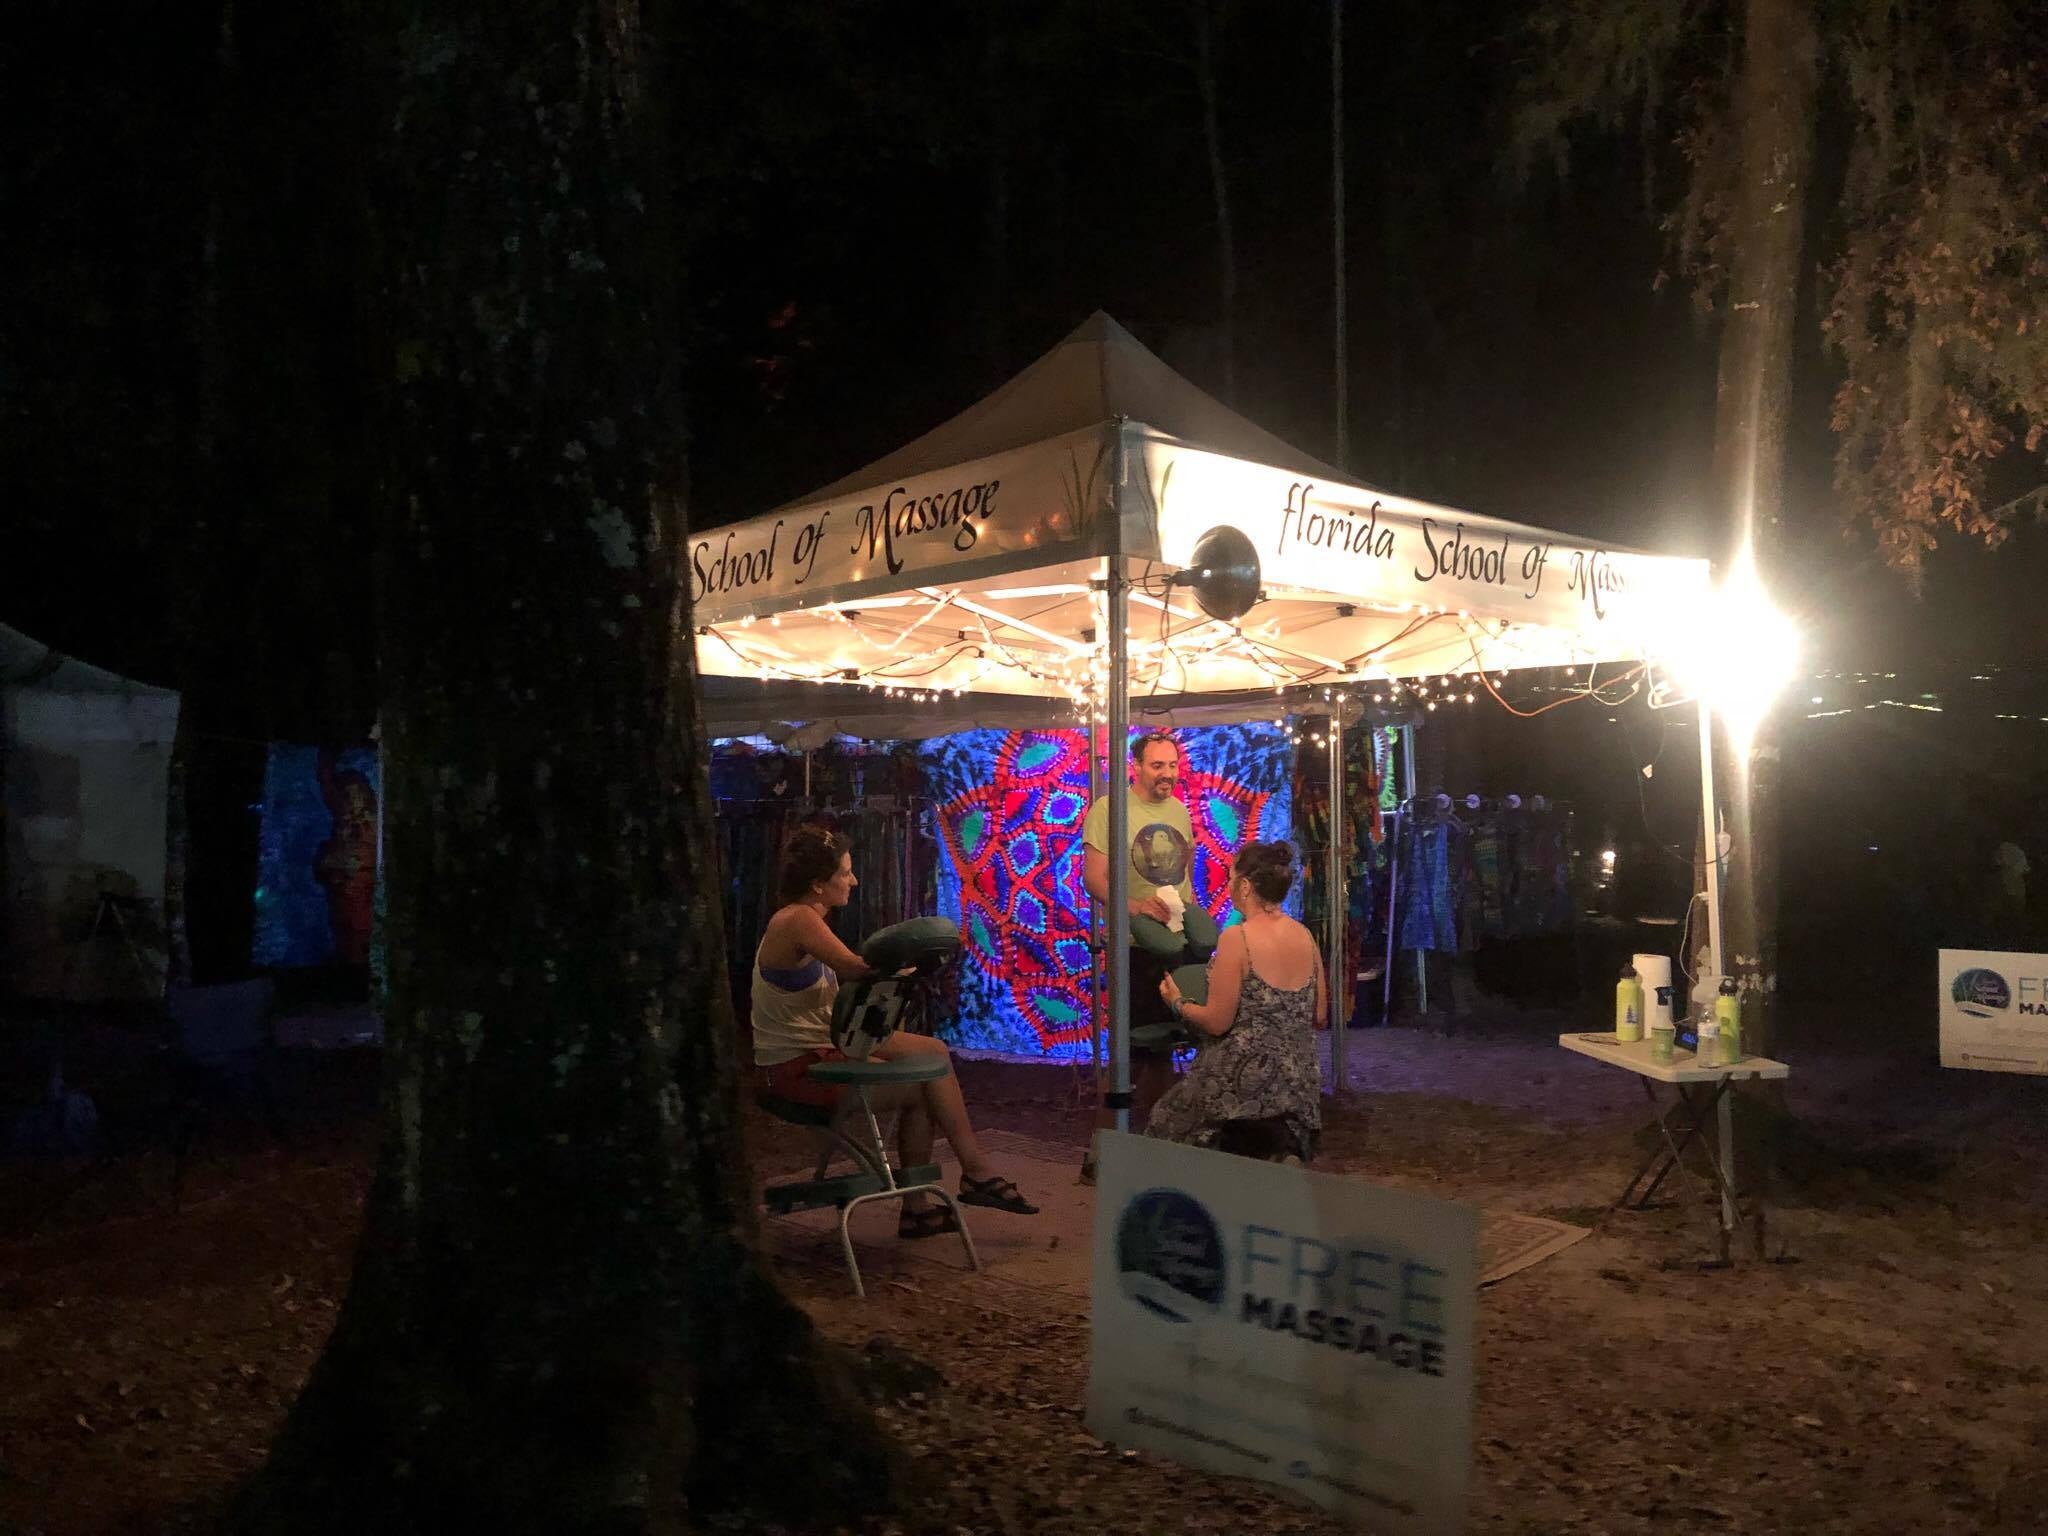 Amazing people come out to vend, like the florida school of massage. They and the spirit of suwannee make for an excellent and relaxing trip :)